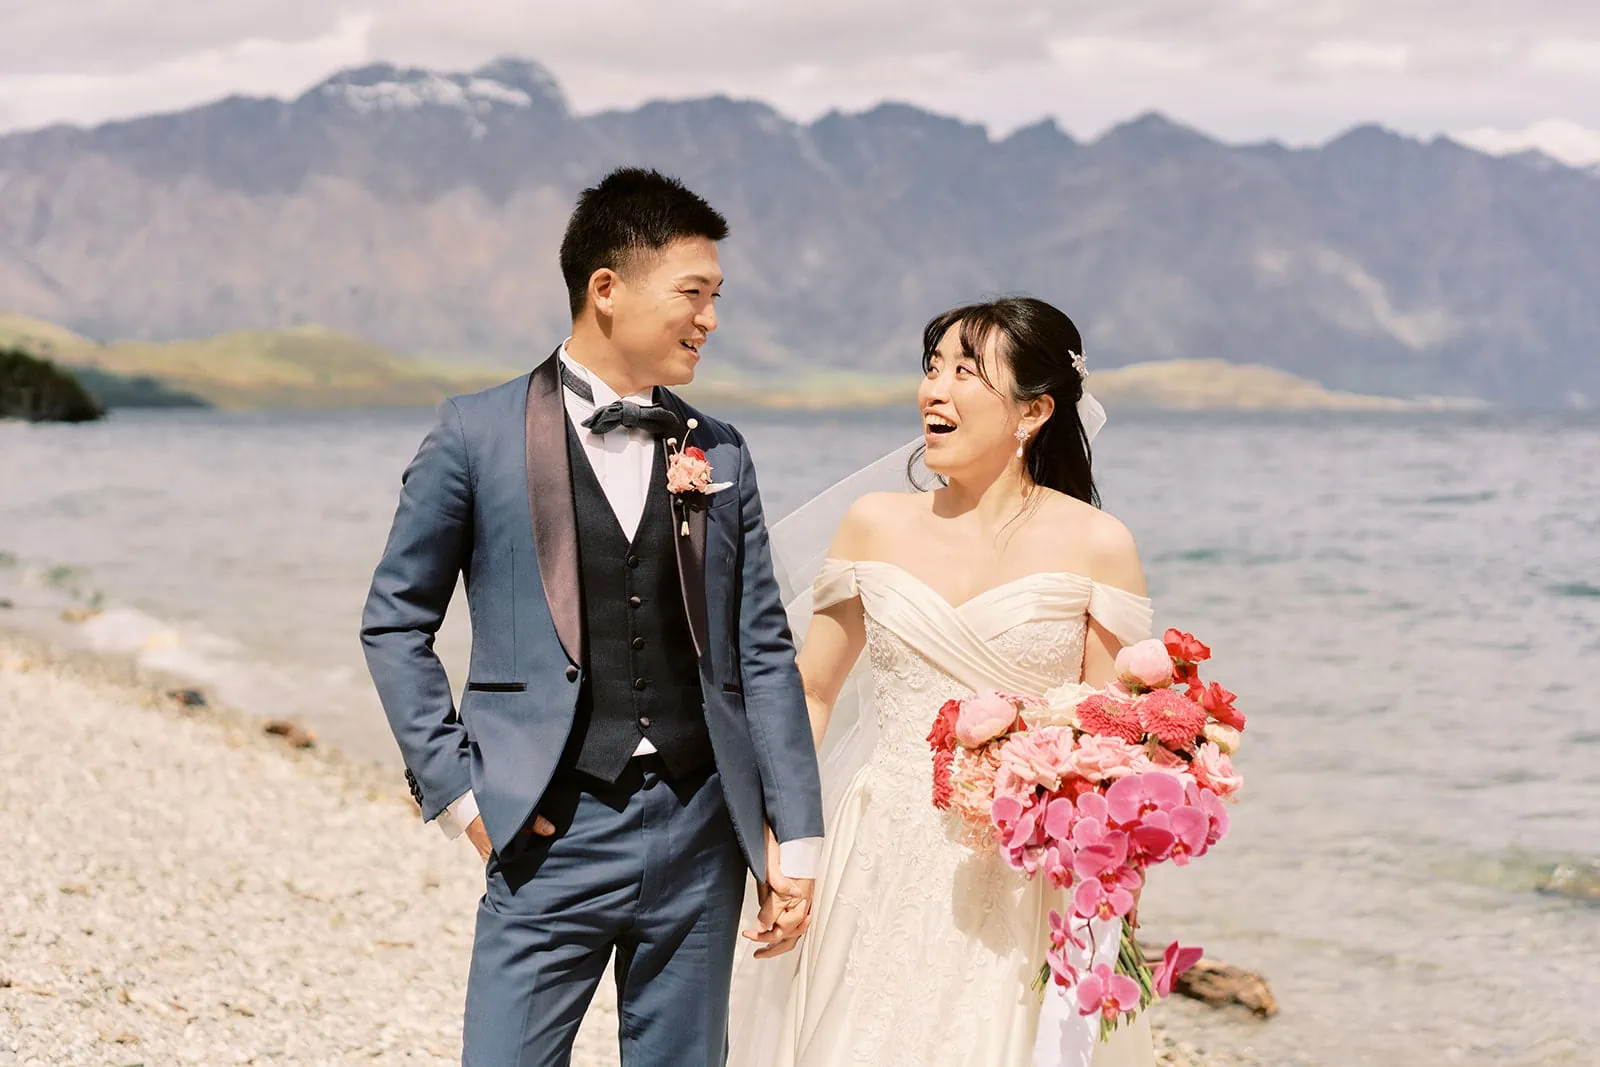 Queenstown Elopement Heli Wedding Photographer クイーンズタウン結婚式 | A couple dressed in their wedding attire pose for a pre-wedding photoshoot on a picturesque beach, with majestic mountains towering in the background.